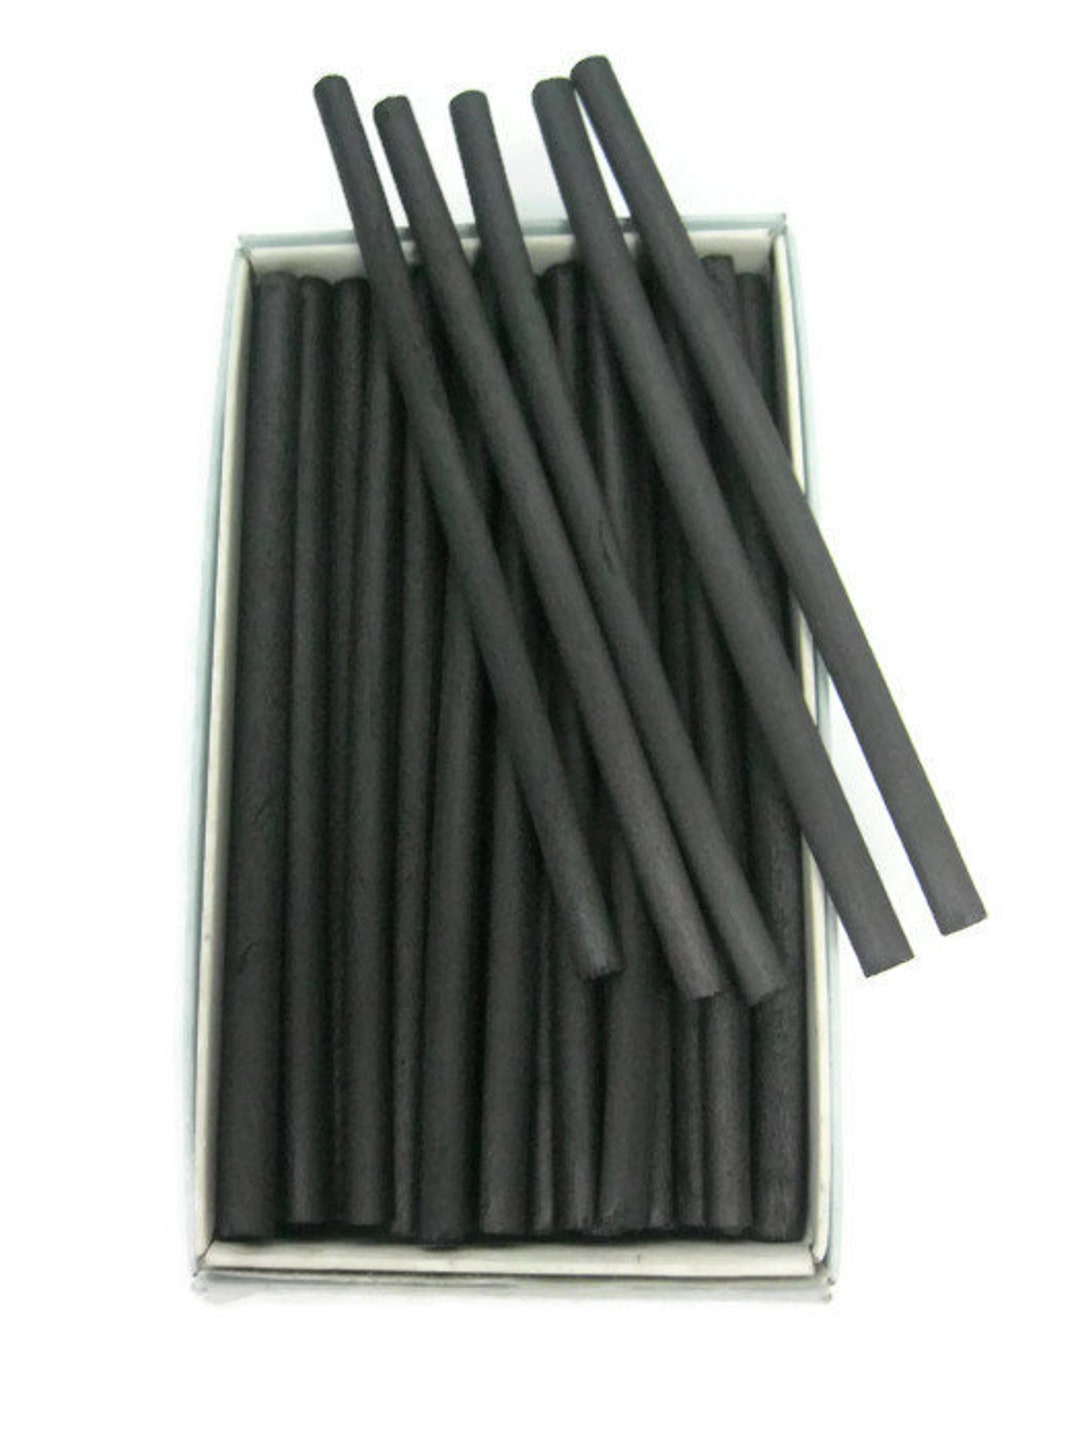 Willow Charcoal Sticks, Assorted Sizes - Set of 45